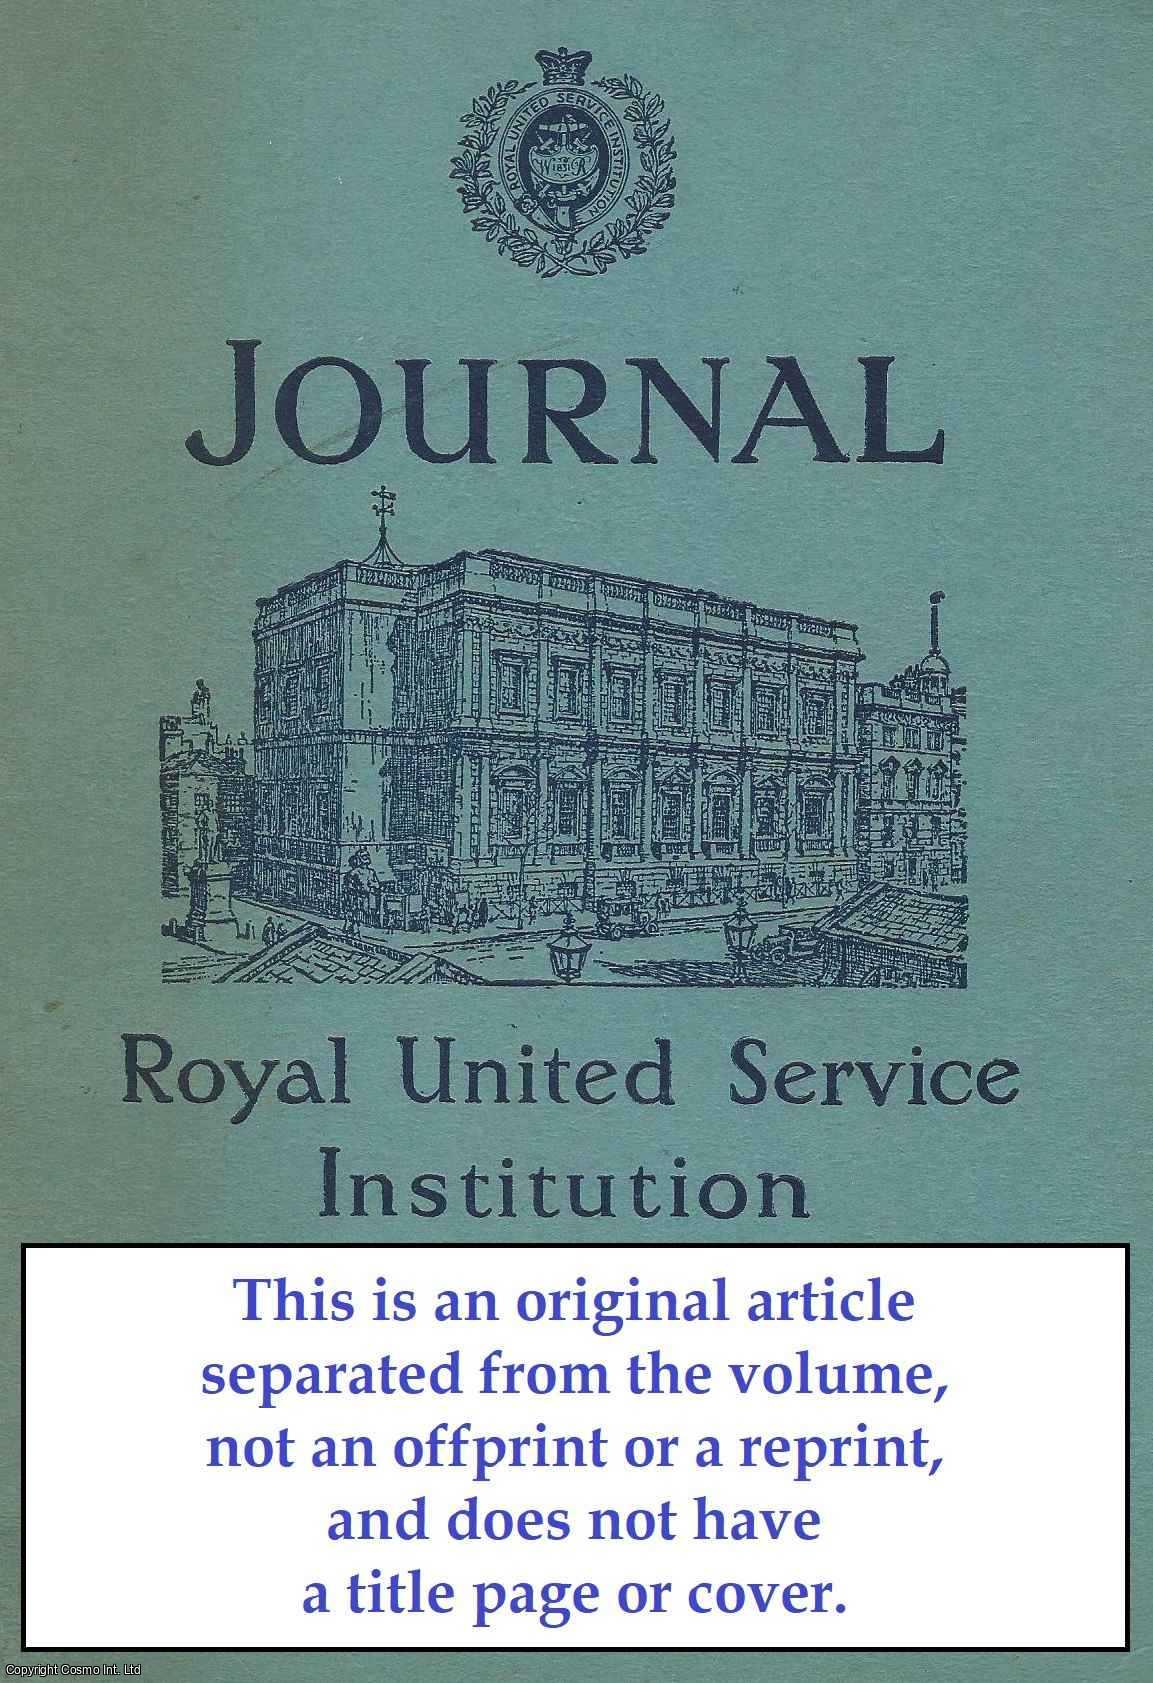 Anthony Verrier - The End of Independence. An original article from The Royal United Service Institution Journal, 1964.